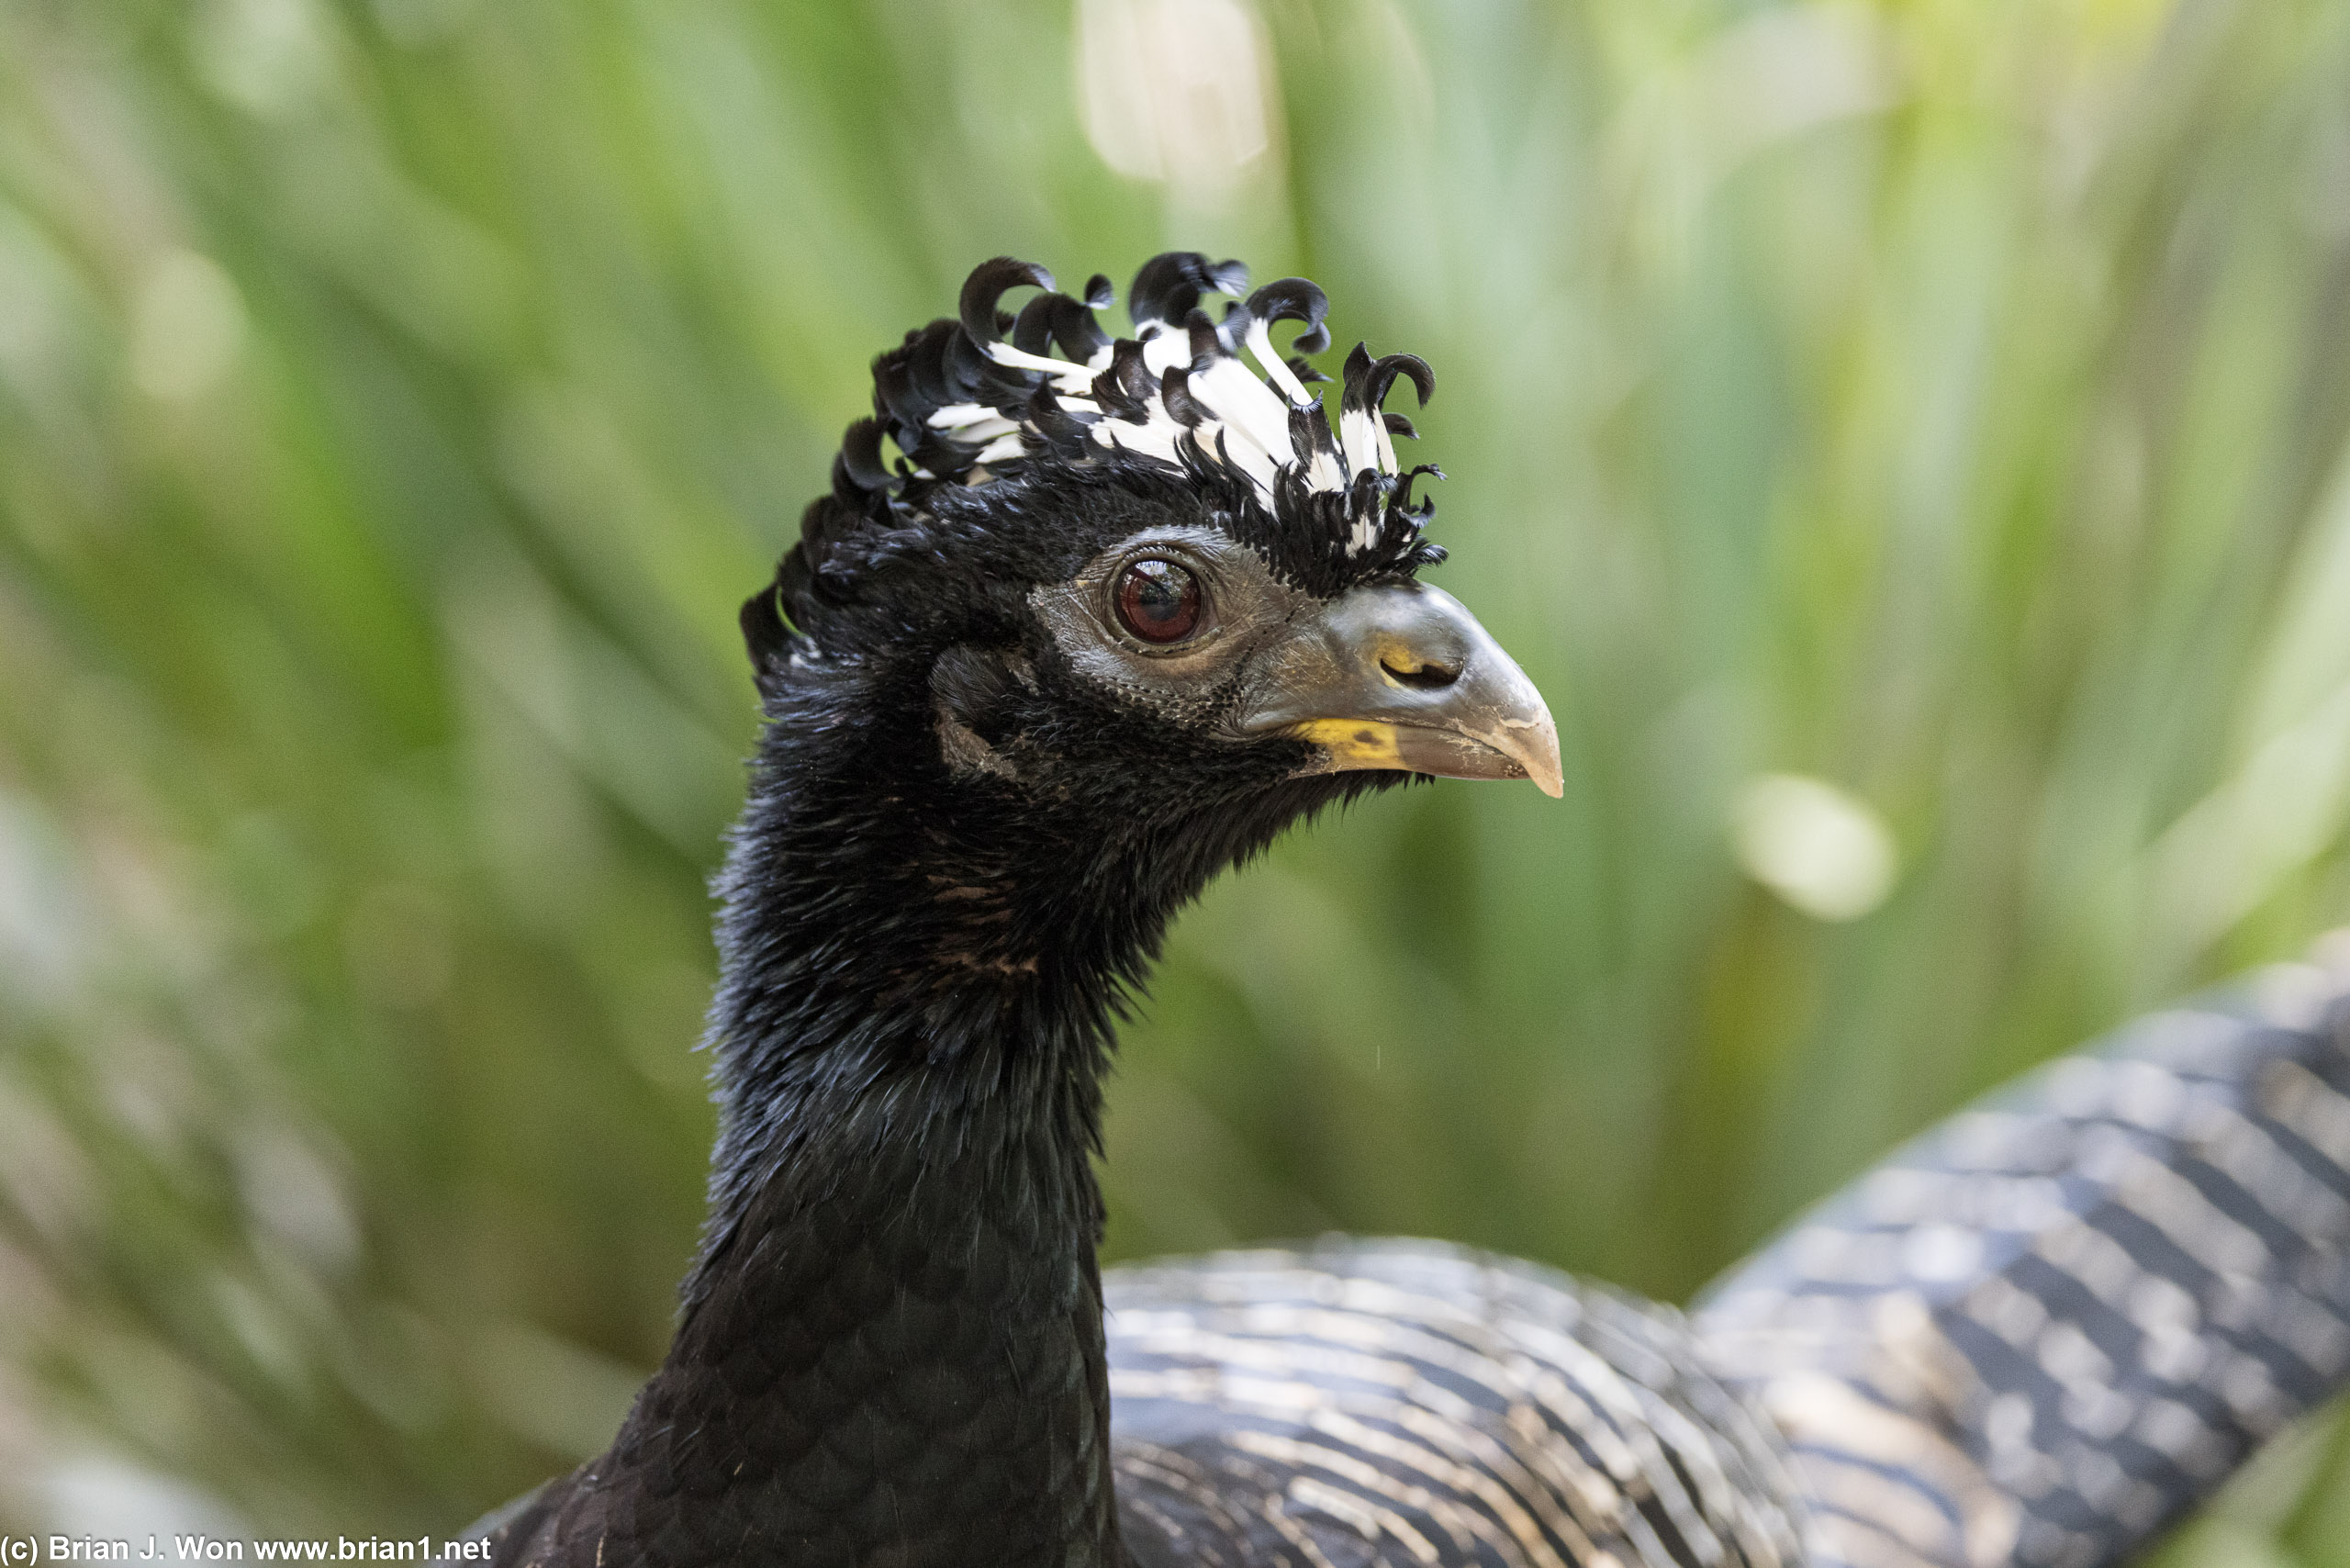 Bare-faced curassow.